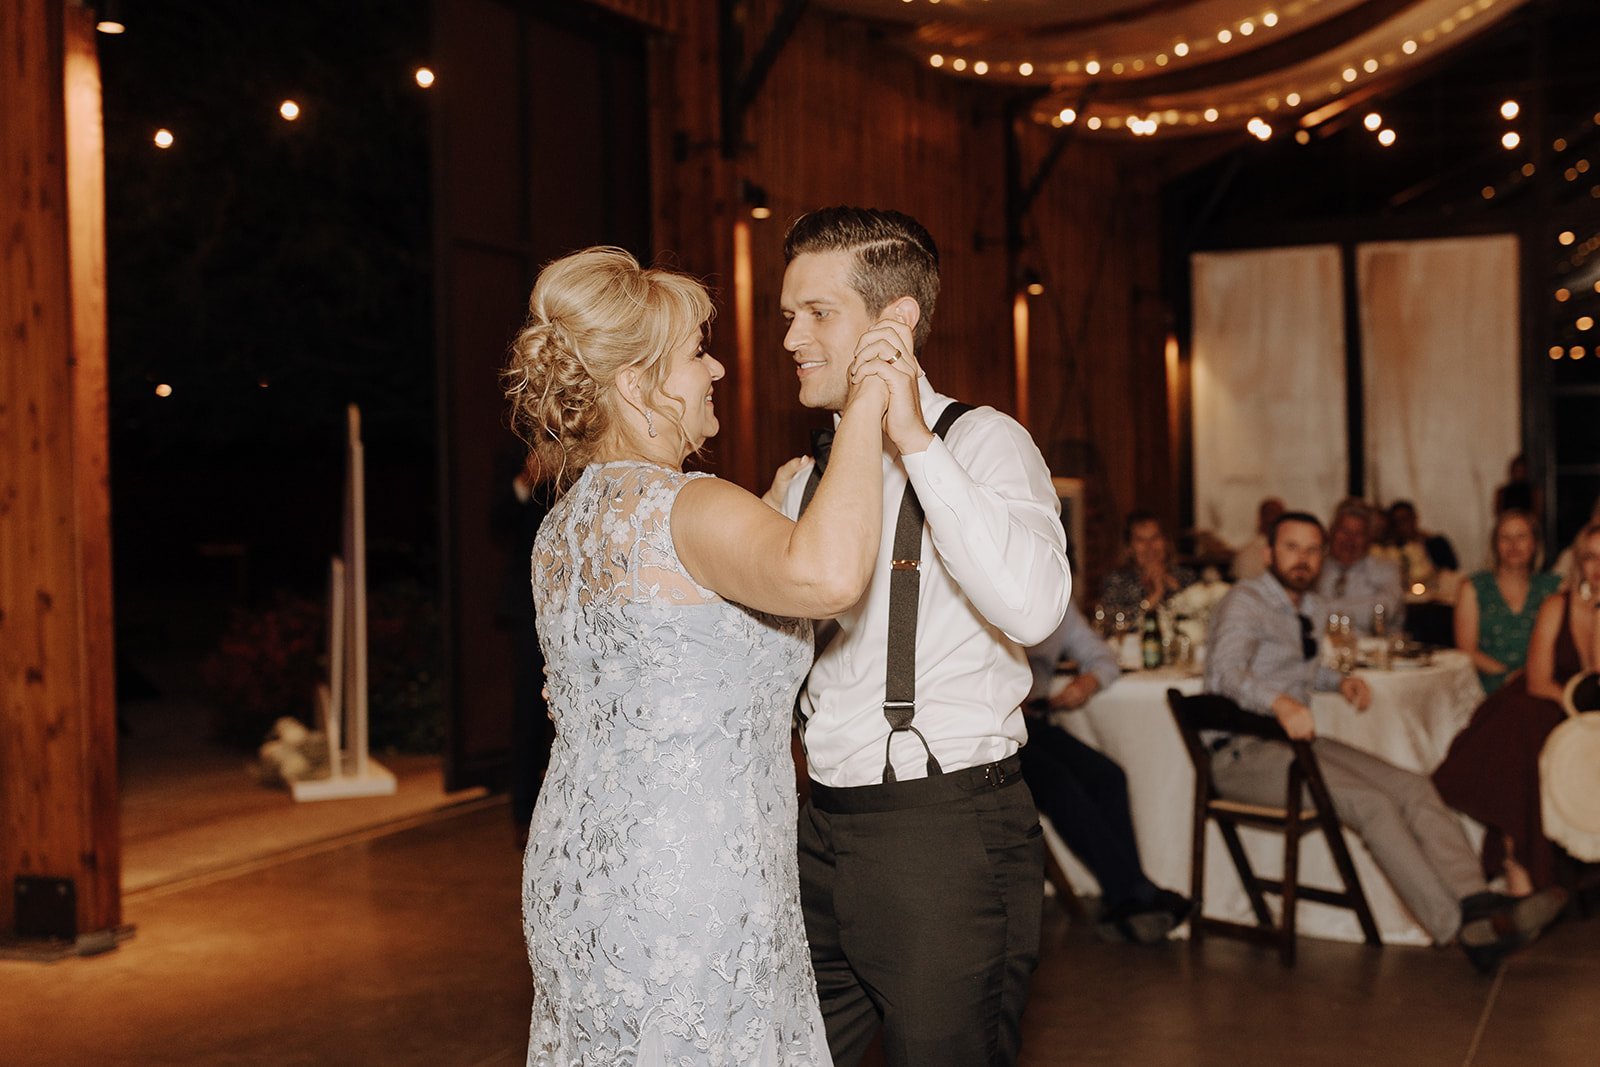 Groom and mother first dance at desert wedding reception